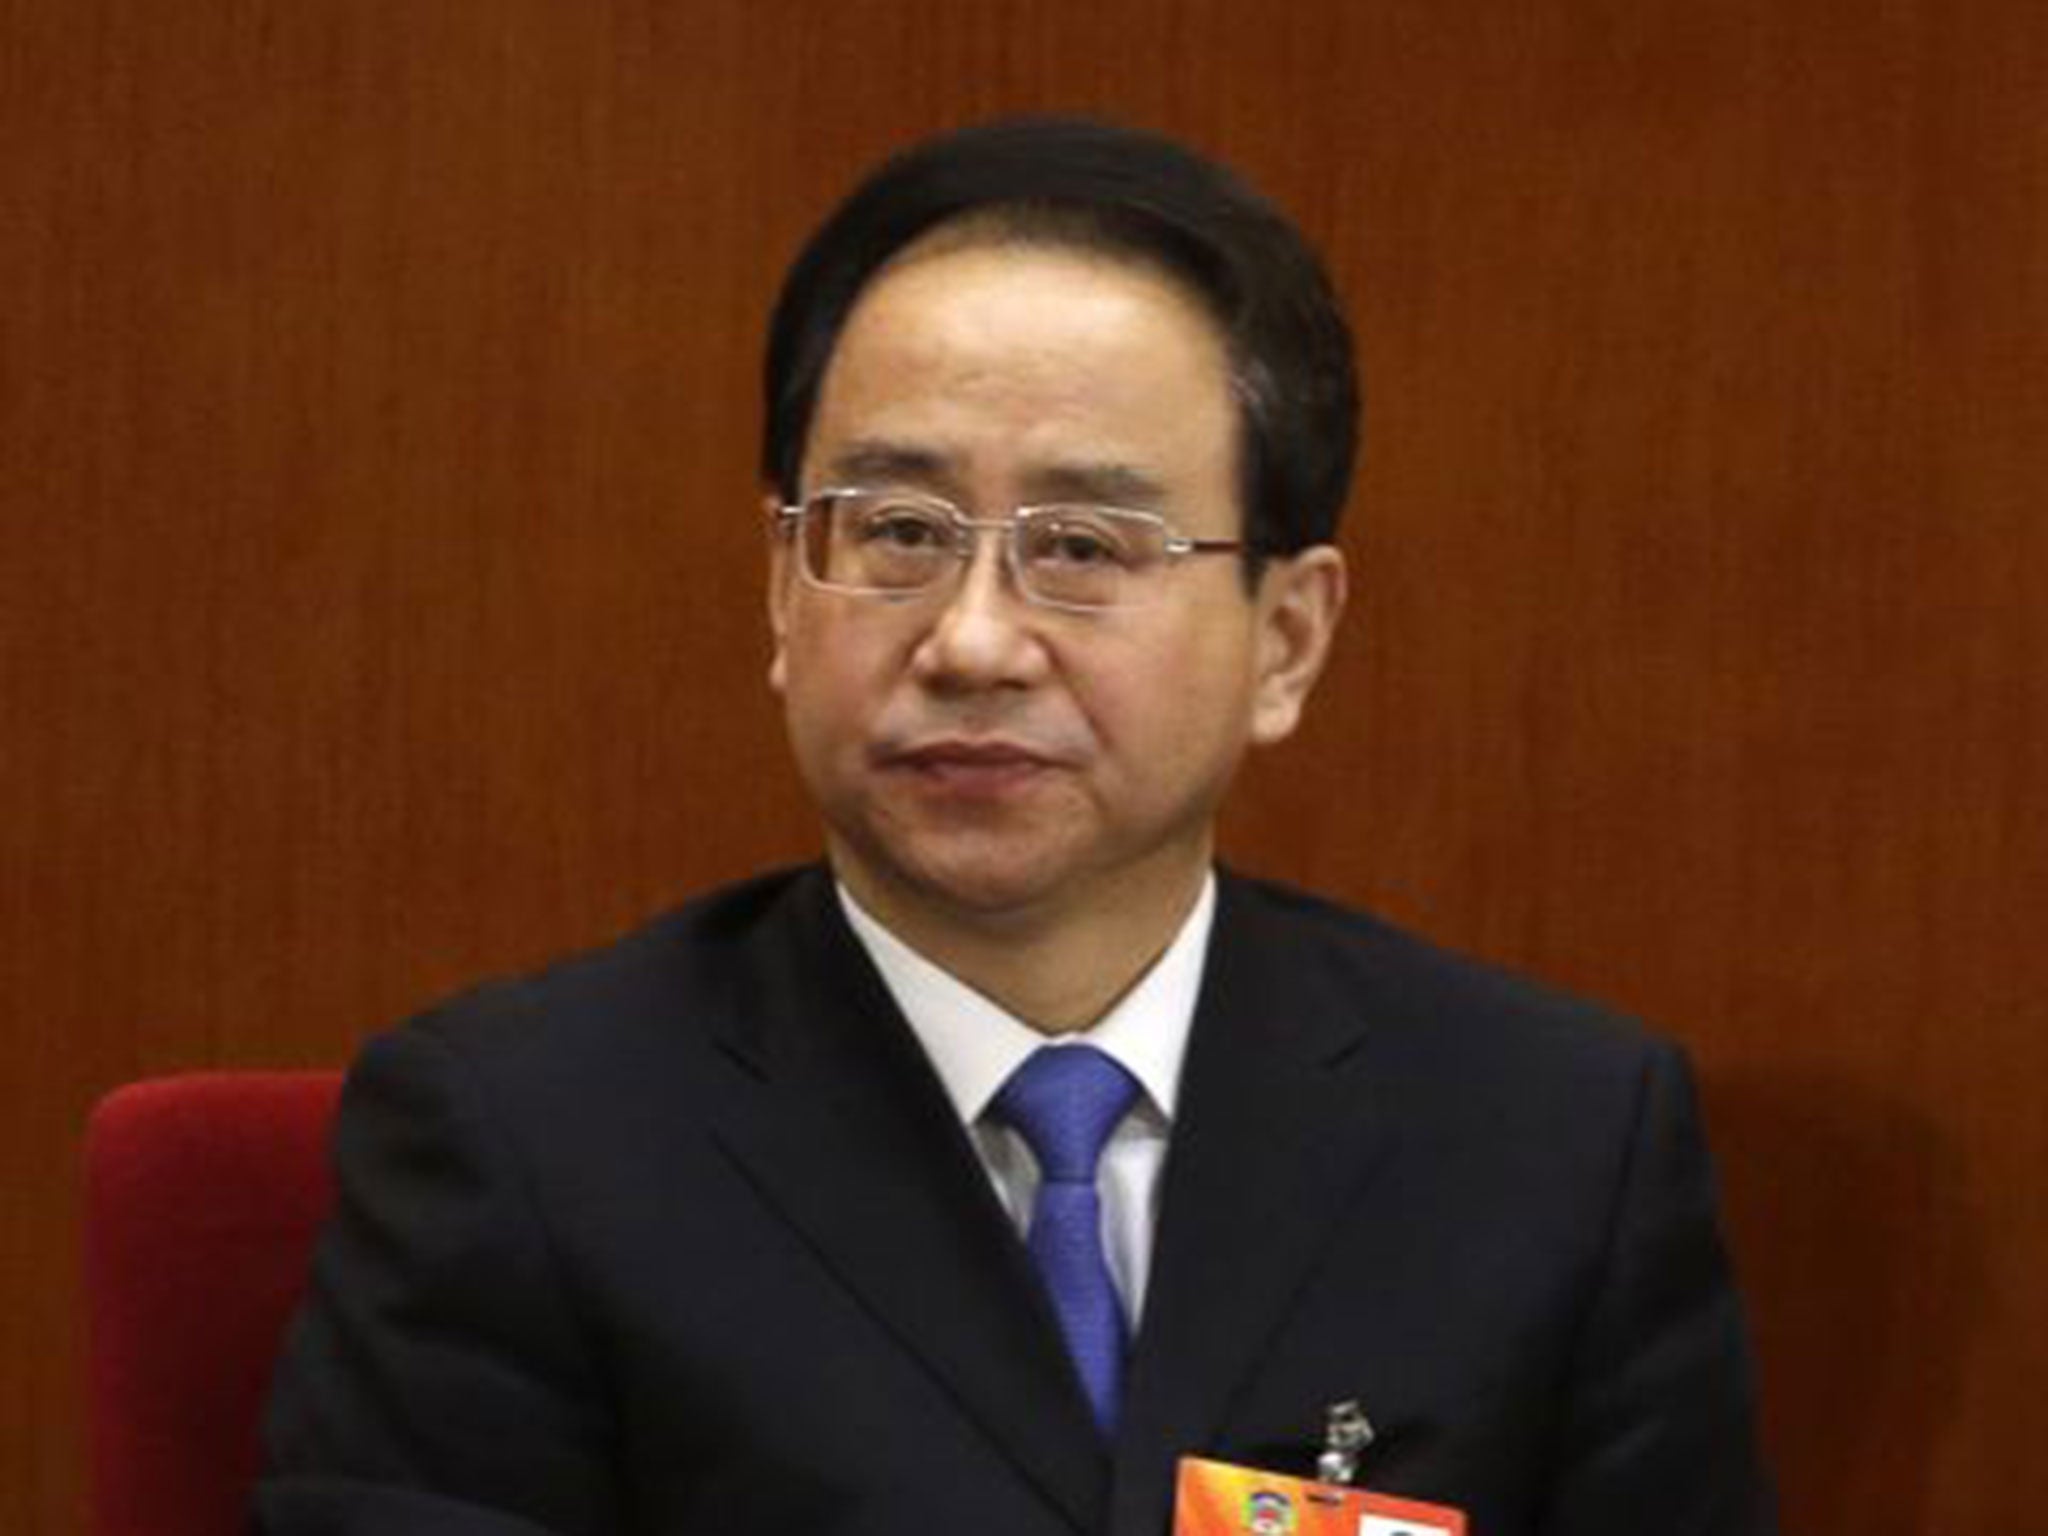 Ling Jihua has been placed under investigation for unspecified disciplinary violations